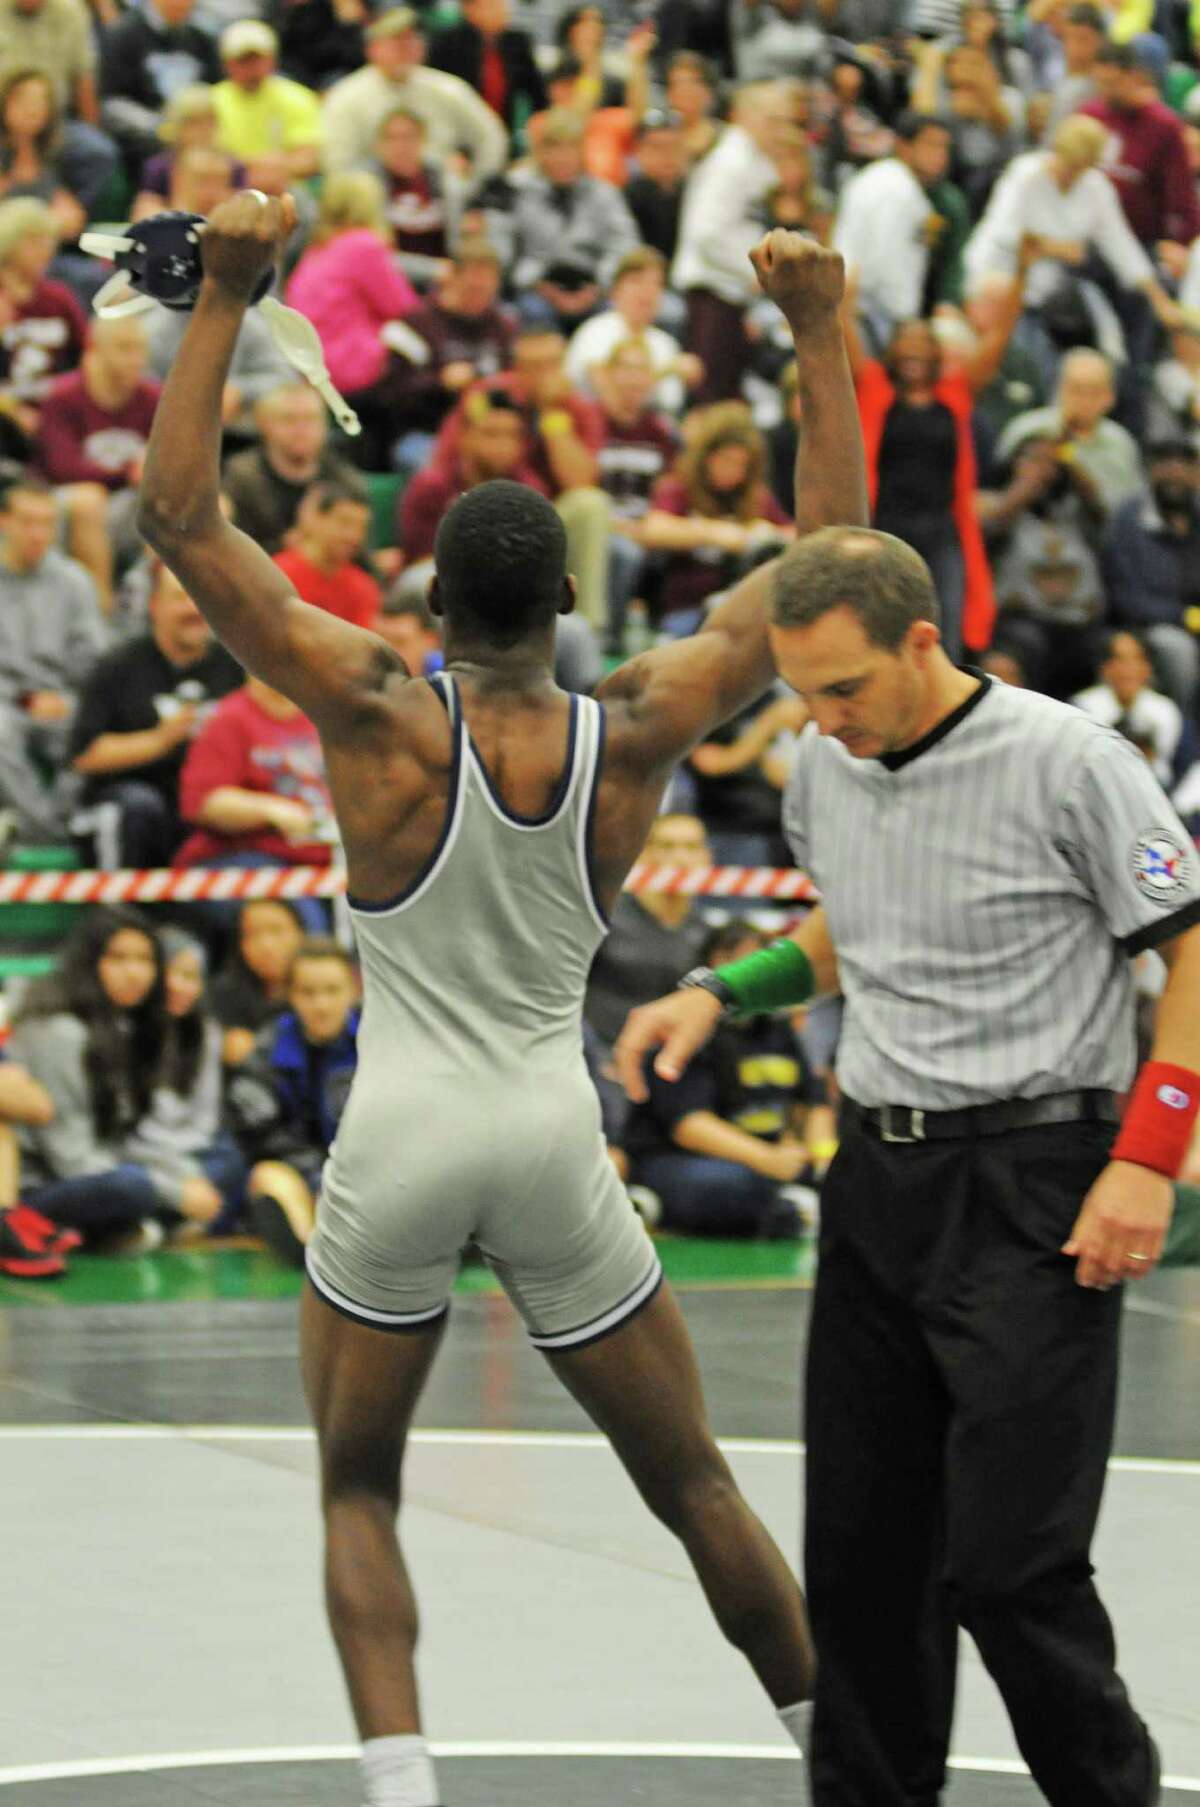 Wrestling Large CyFair ISD contingent headed to state